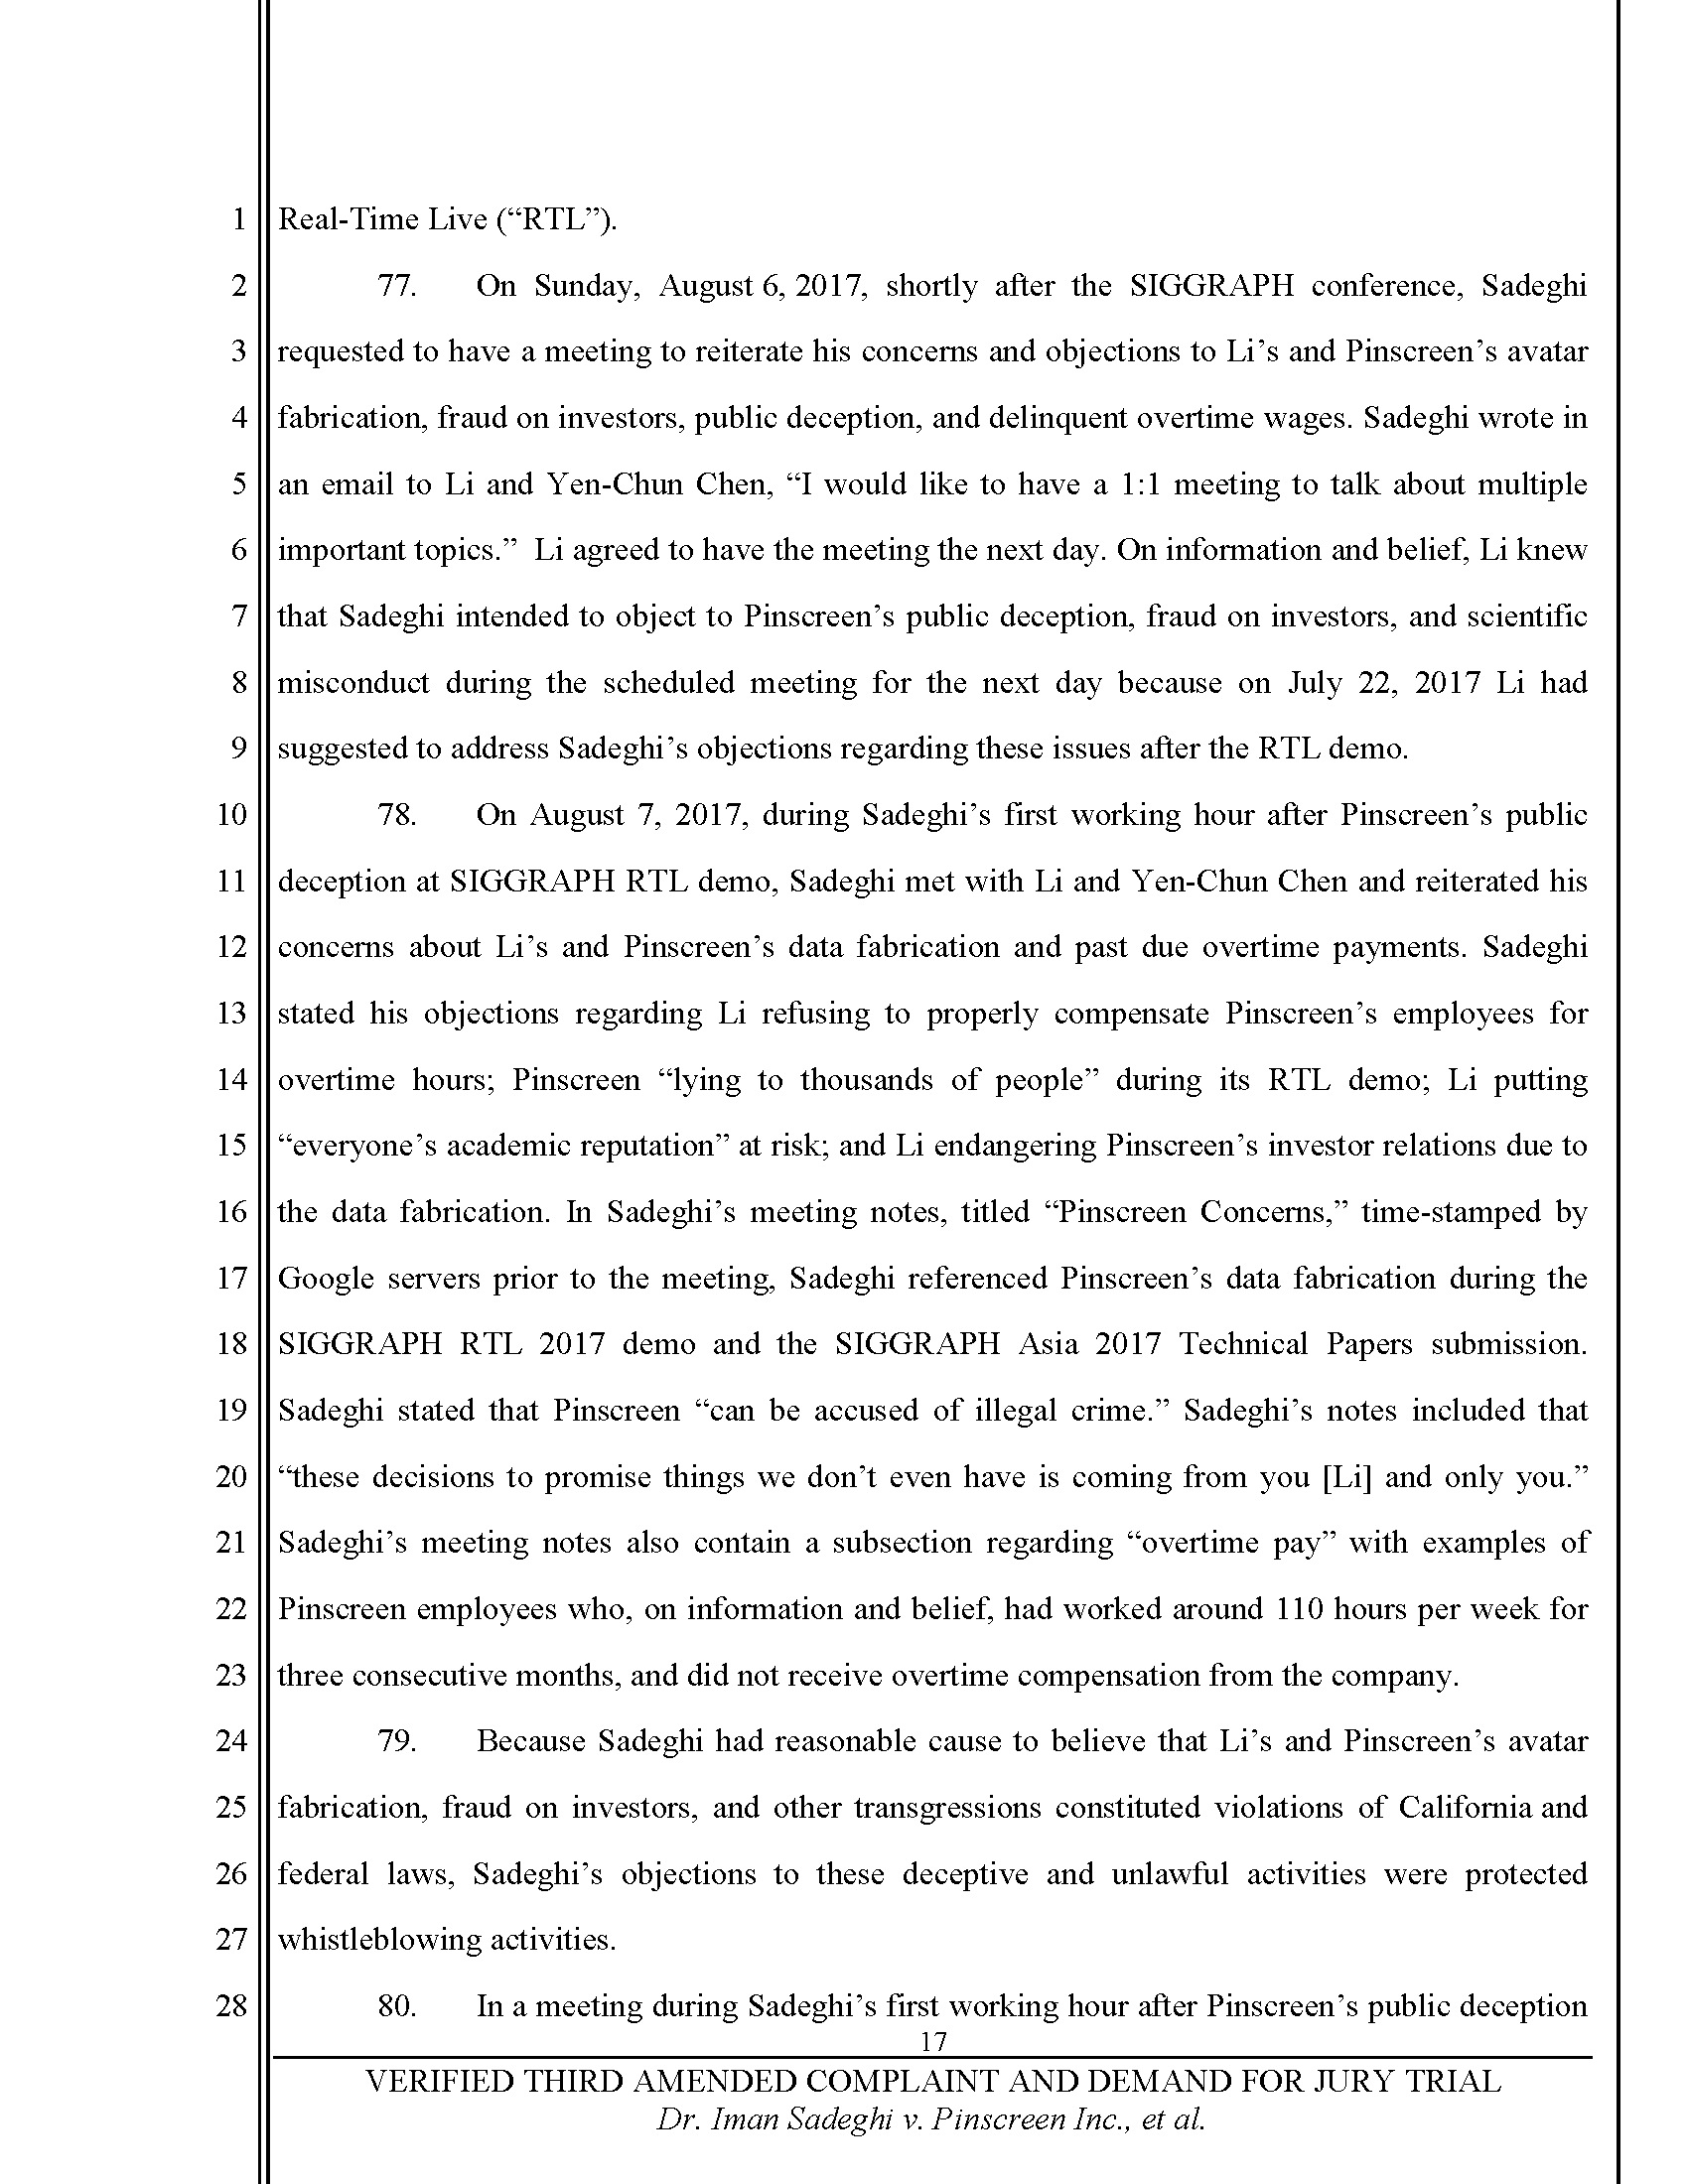 Third Amended Complaint (TAC) Page 18